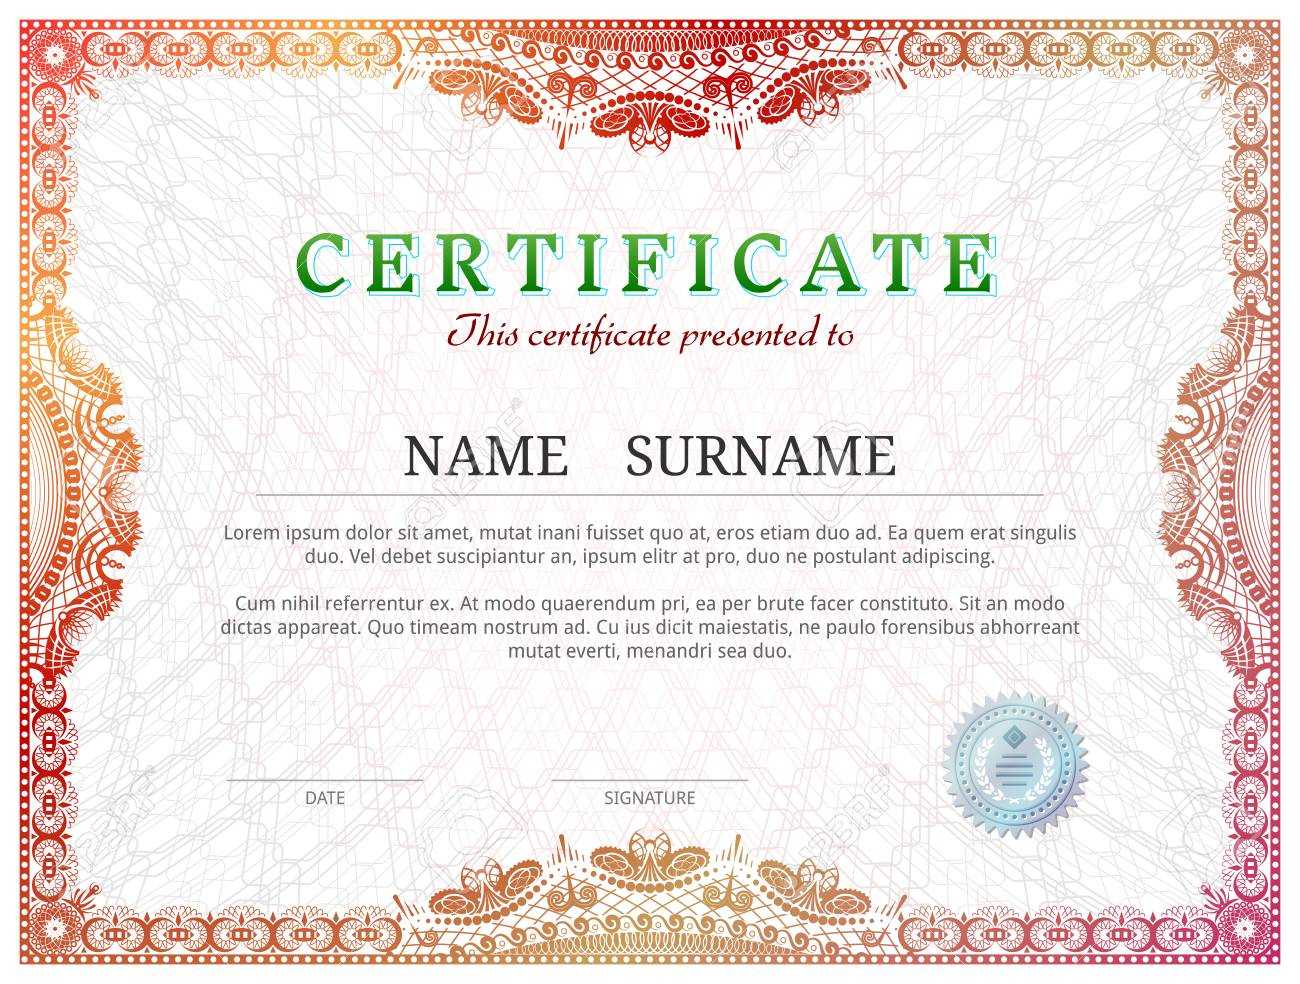 Certificate Template With Guilloche Elements. Red Diploma Border.. Intended For Validation Certificate Template